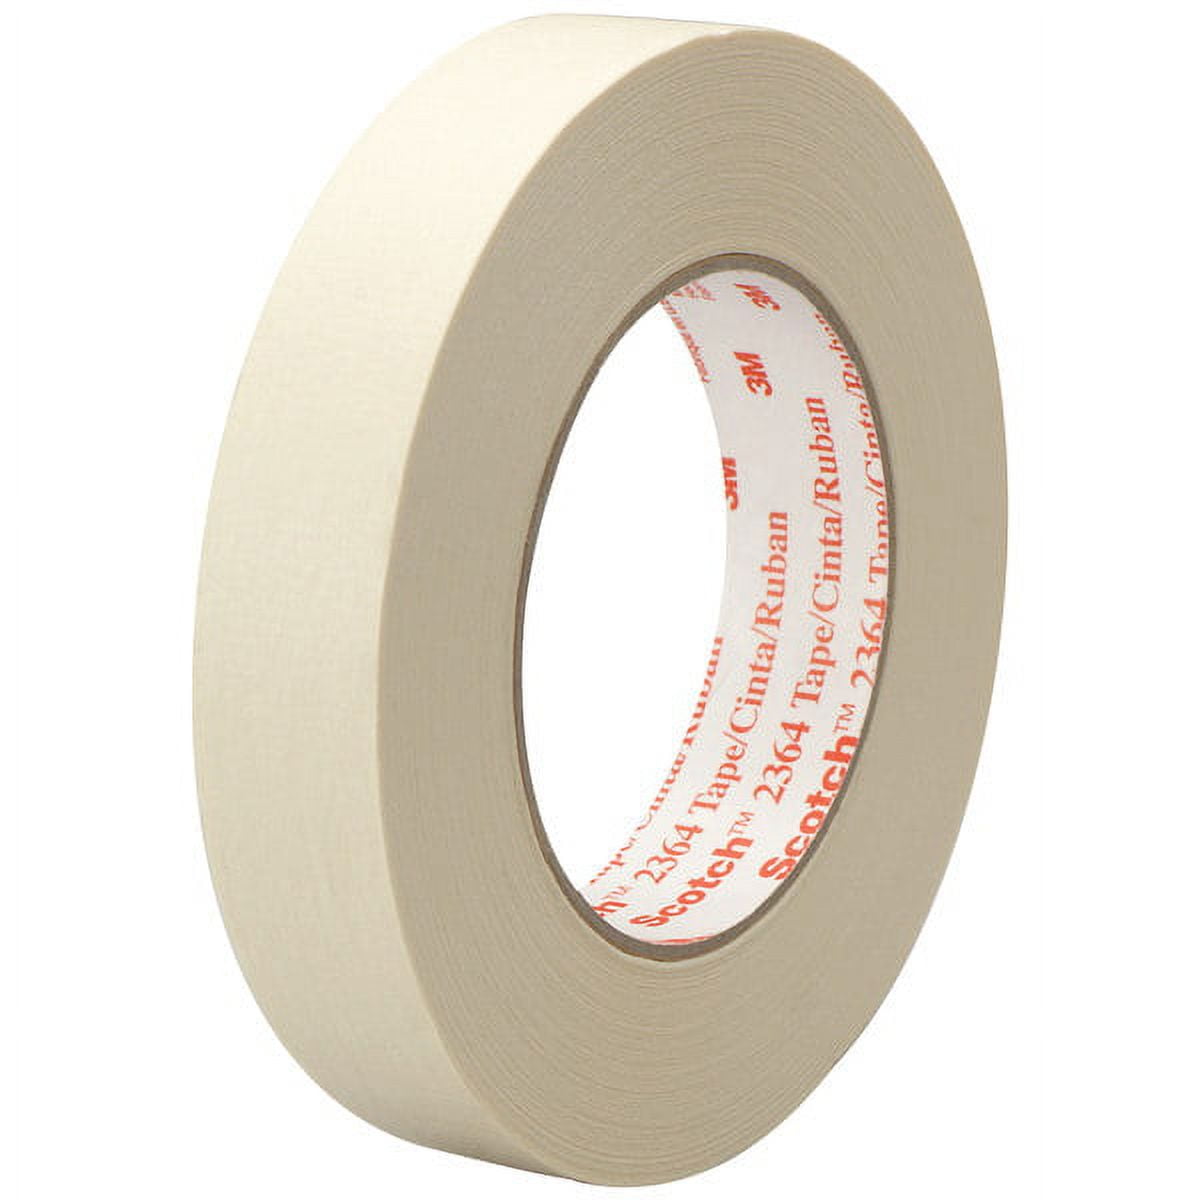 Scotch T935236412pk 1 In. X 60 Yards 2364 Masking Tape, Tan - Pack Of 12